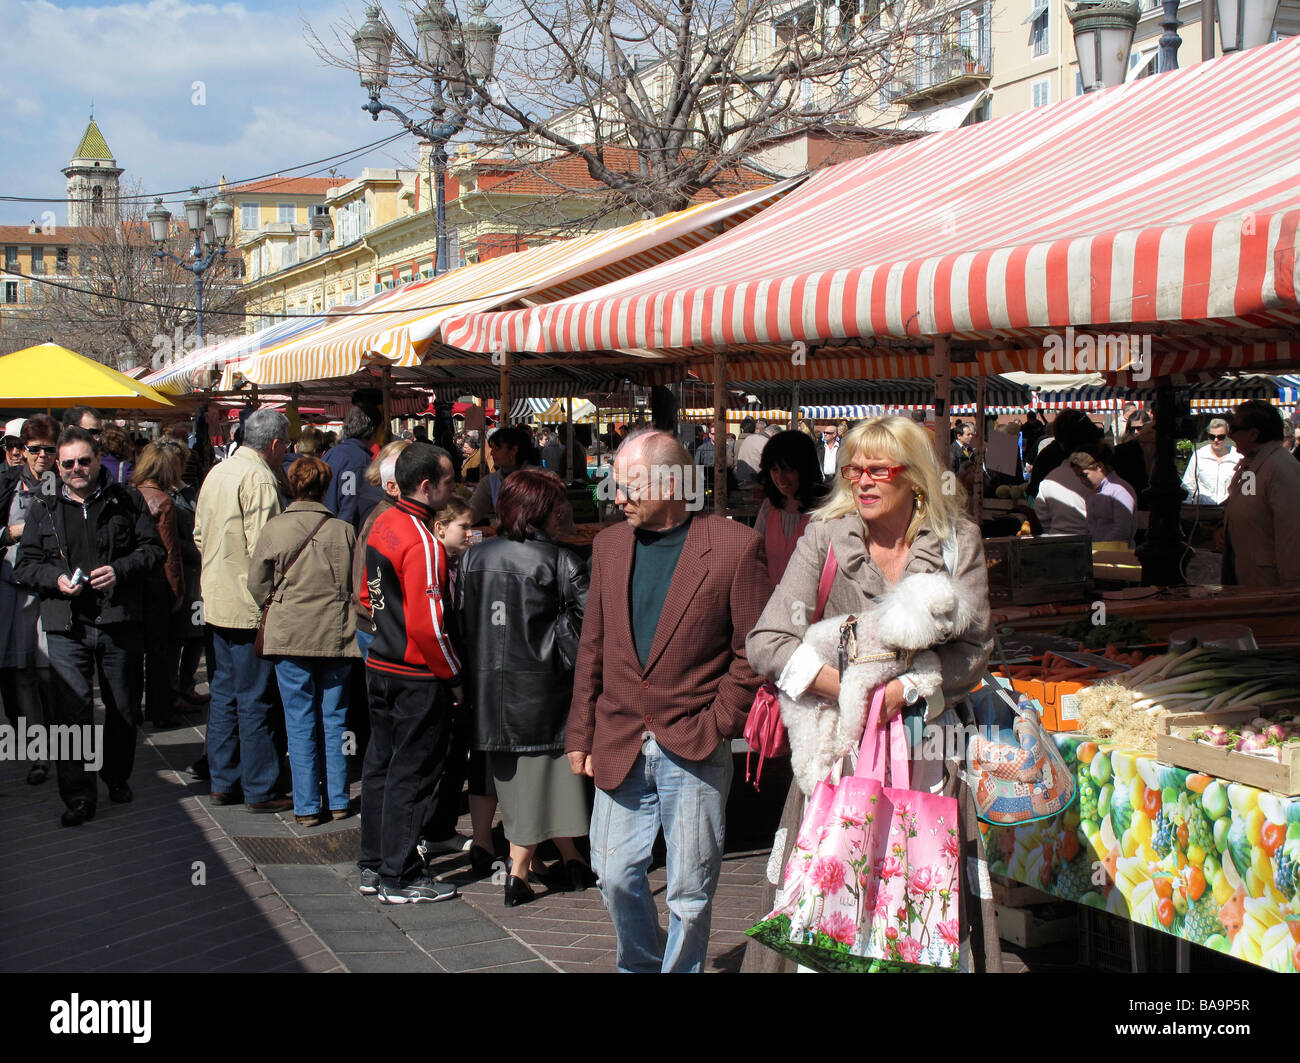 Street market in old town of France, Cote d'Azur, France Stock Photo